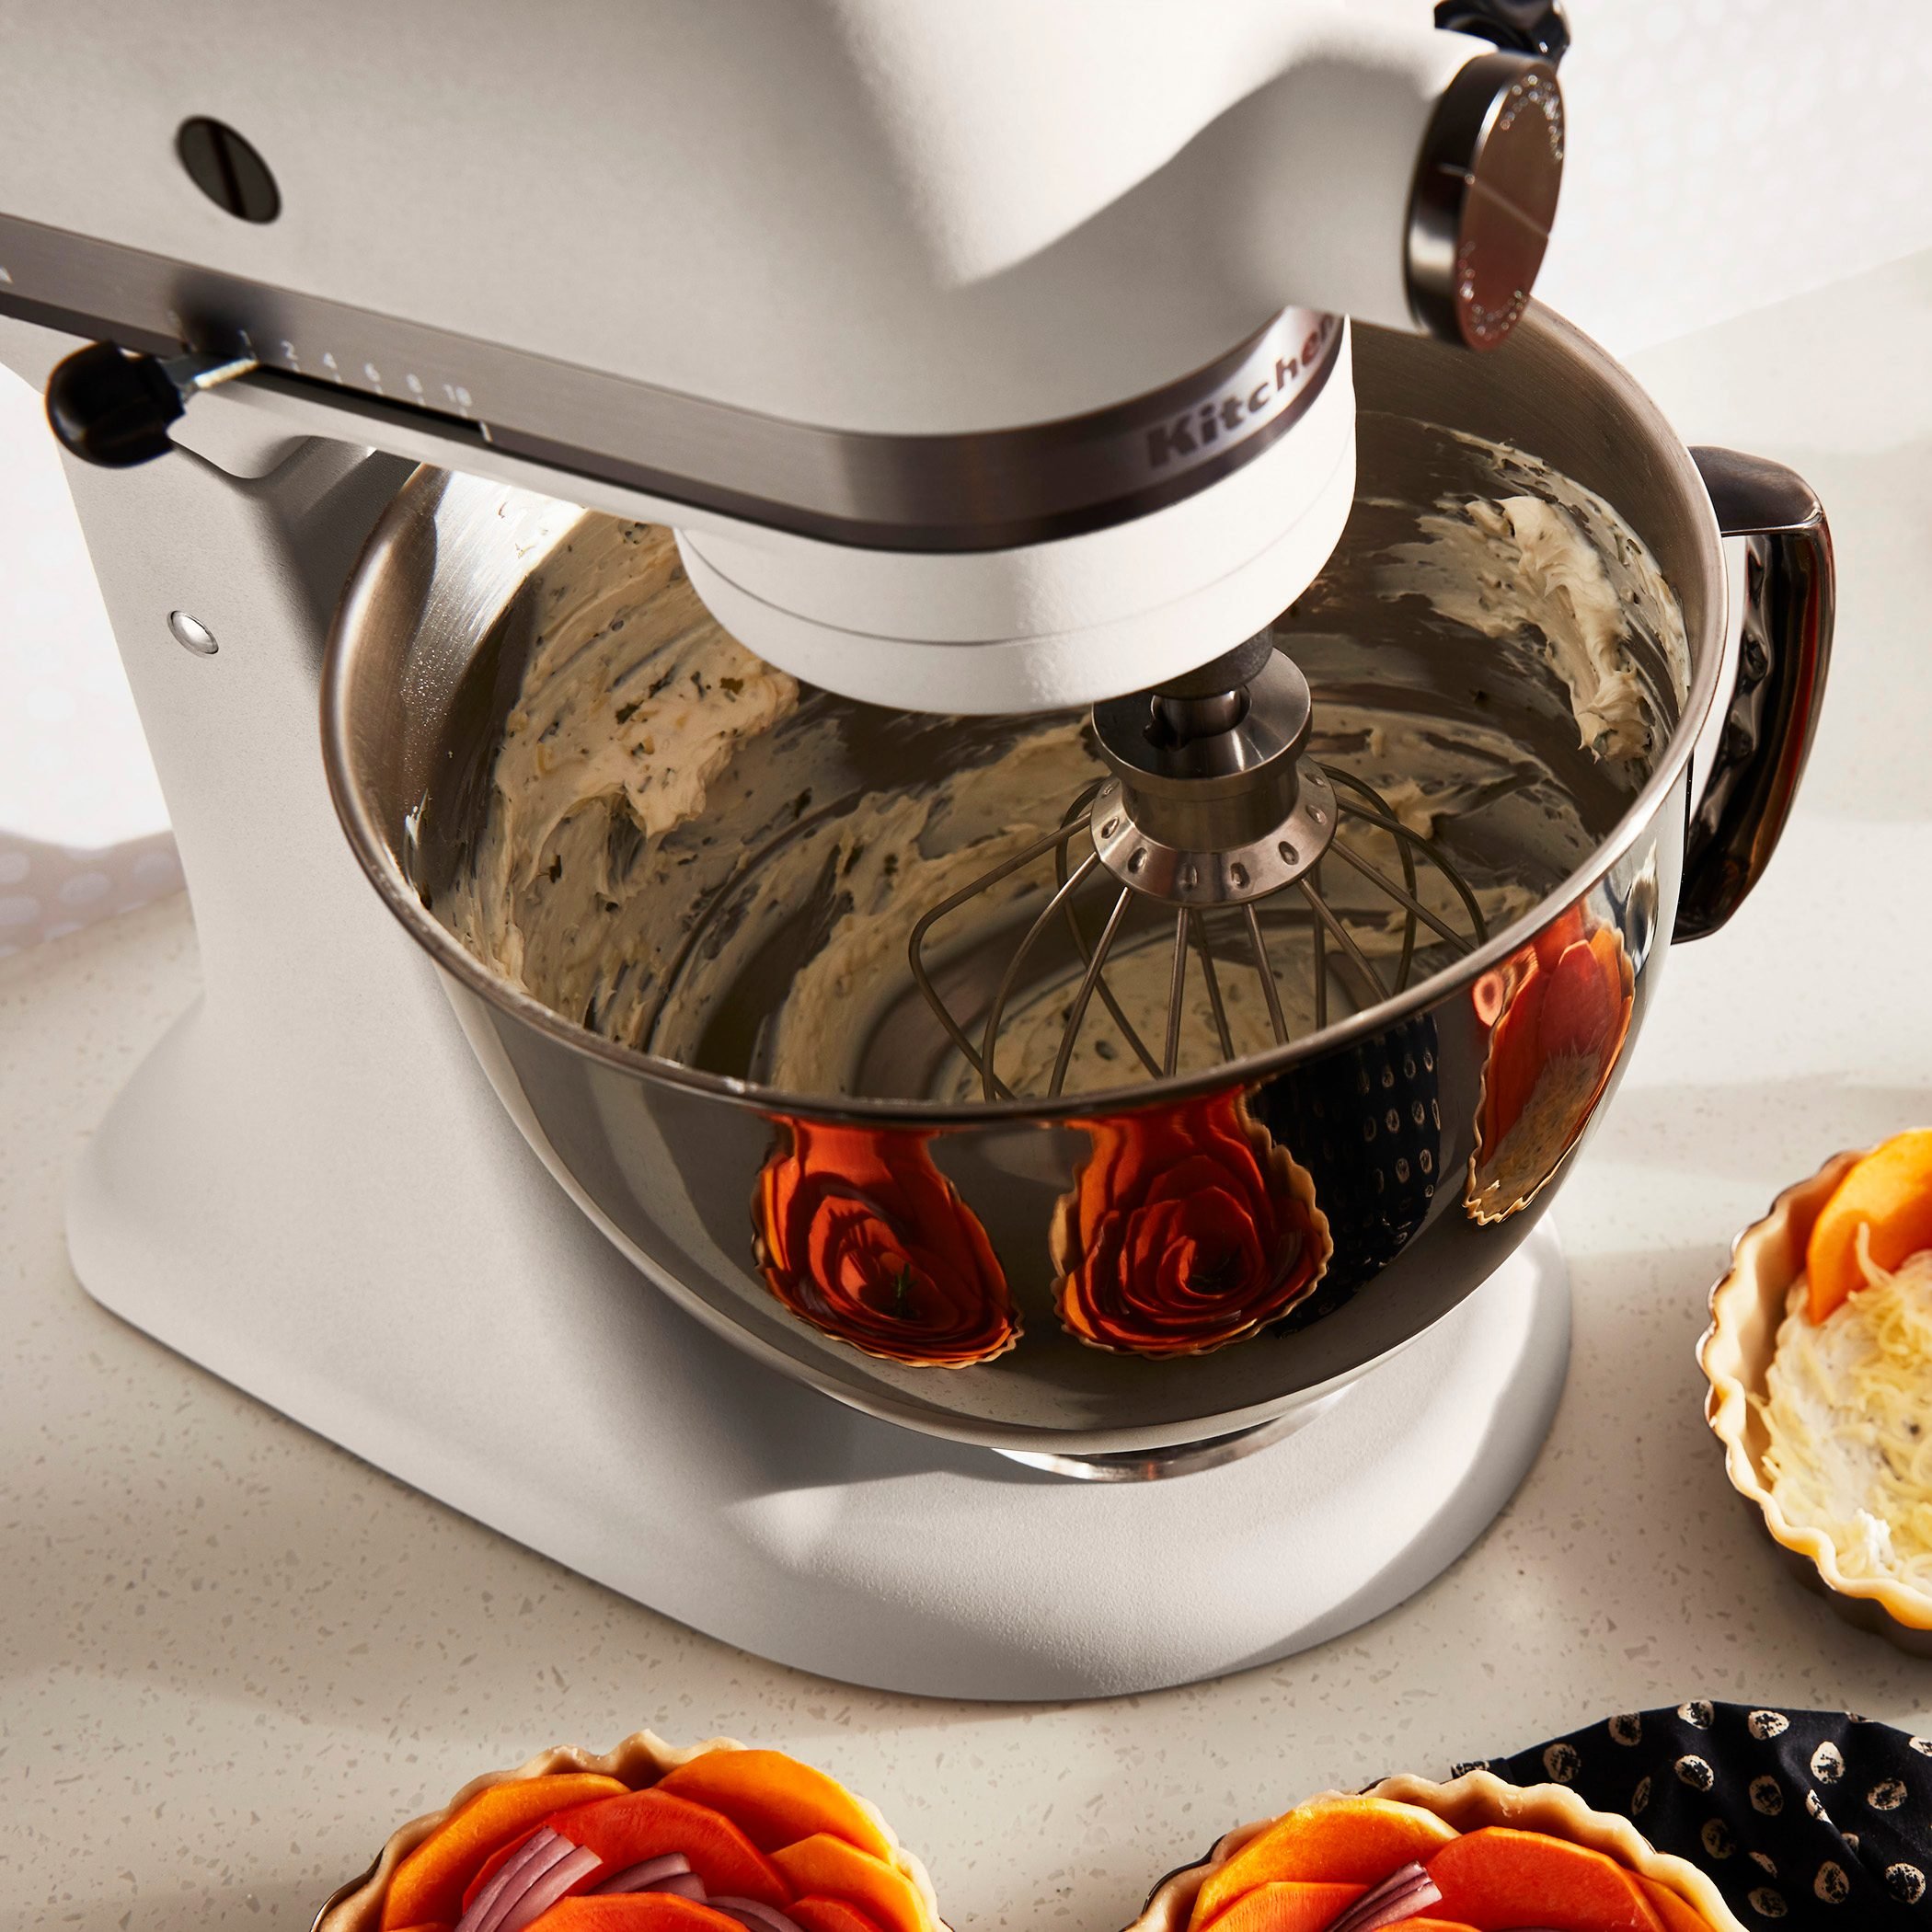 Some things aren't still intended to last forever, like KitchenAid